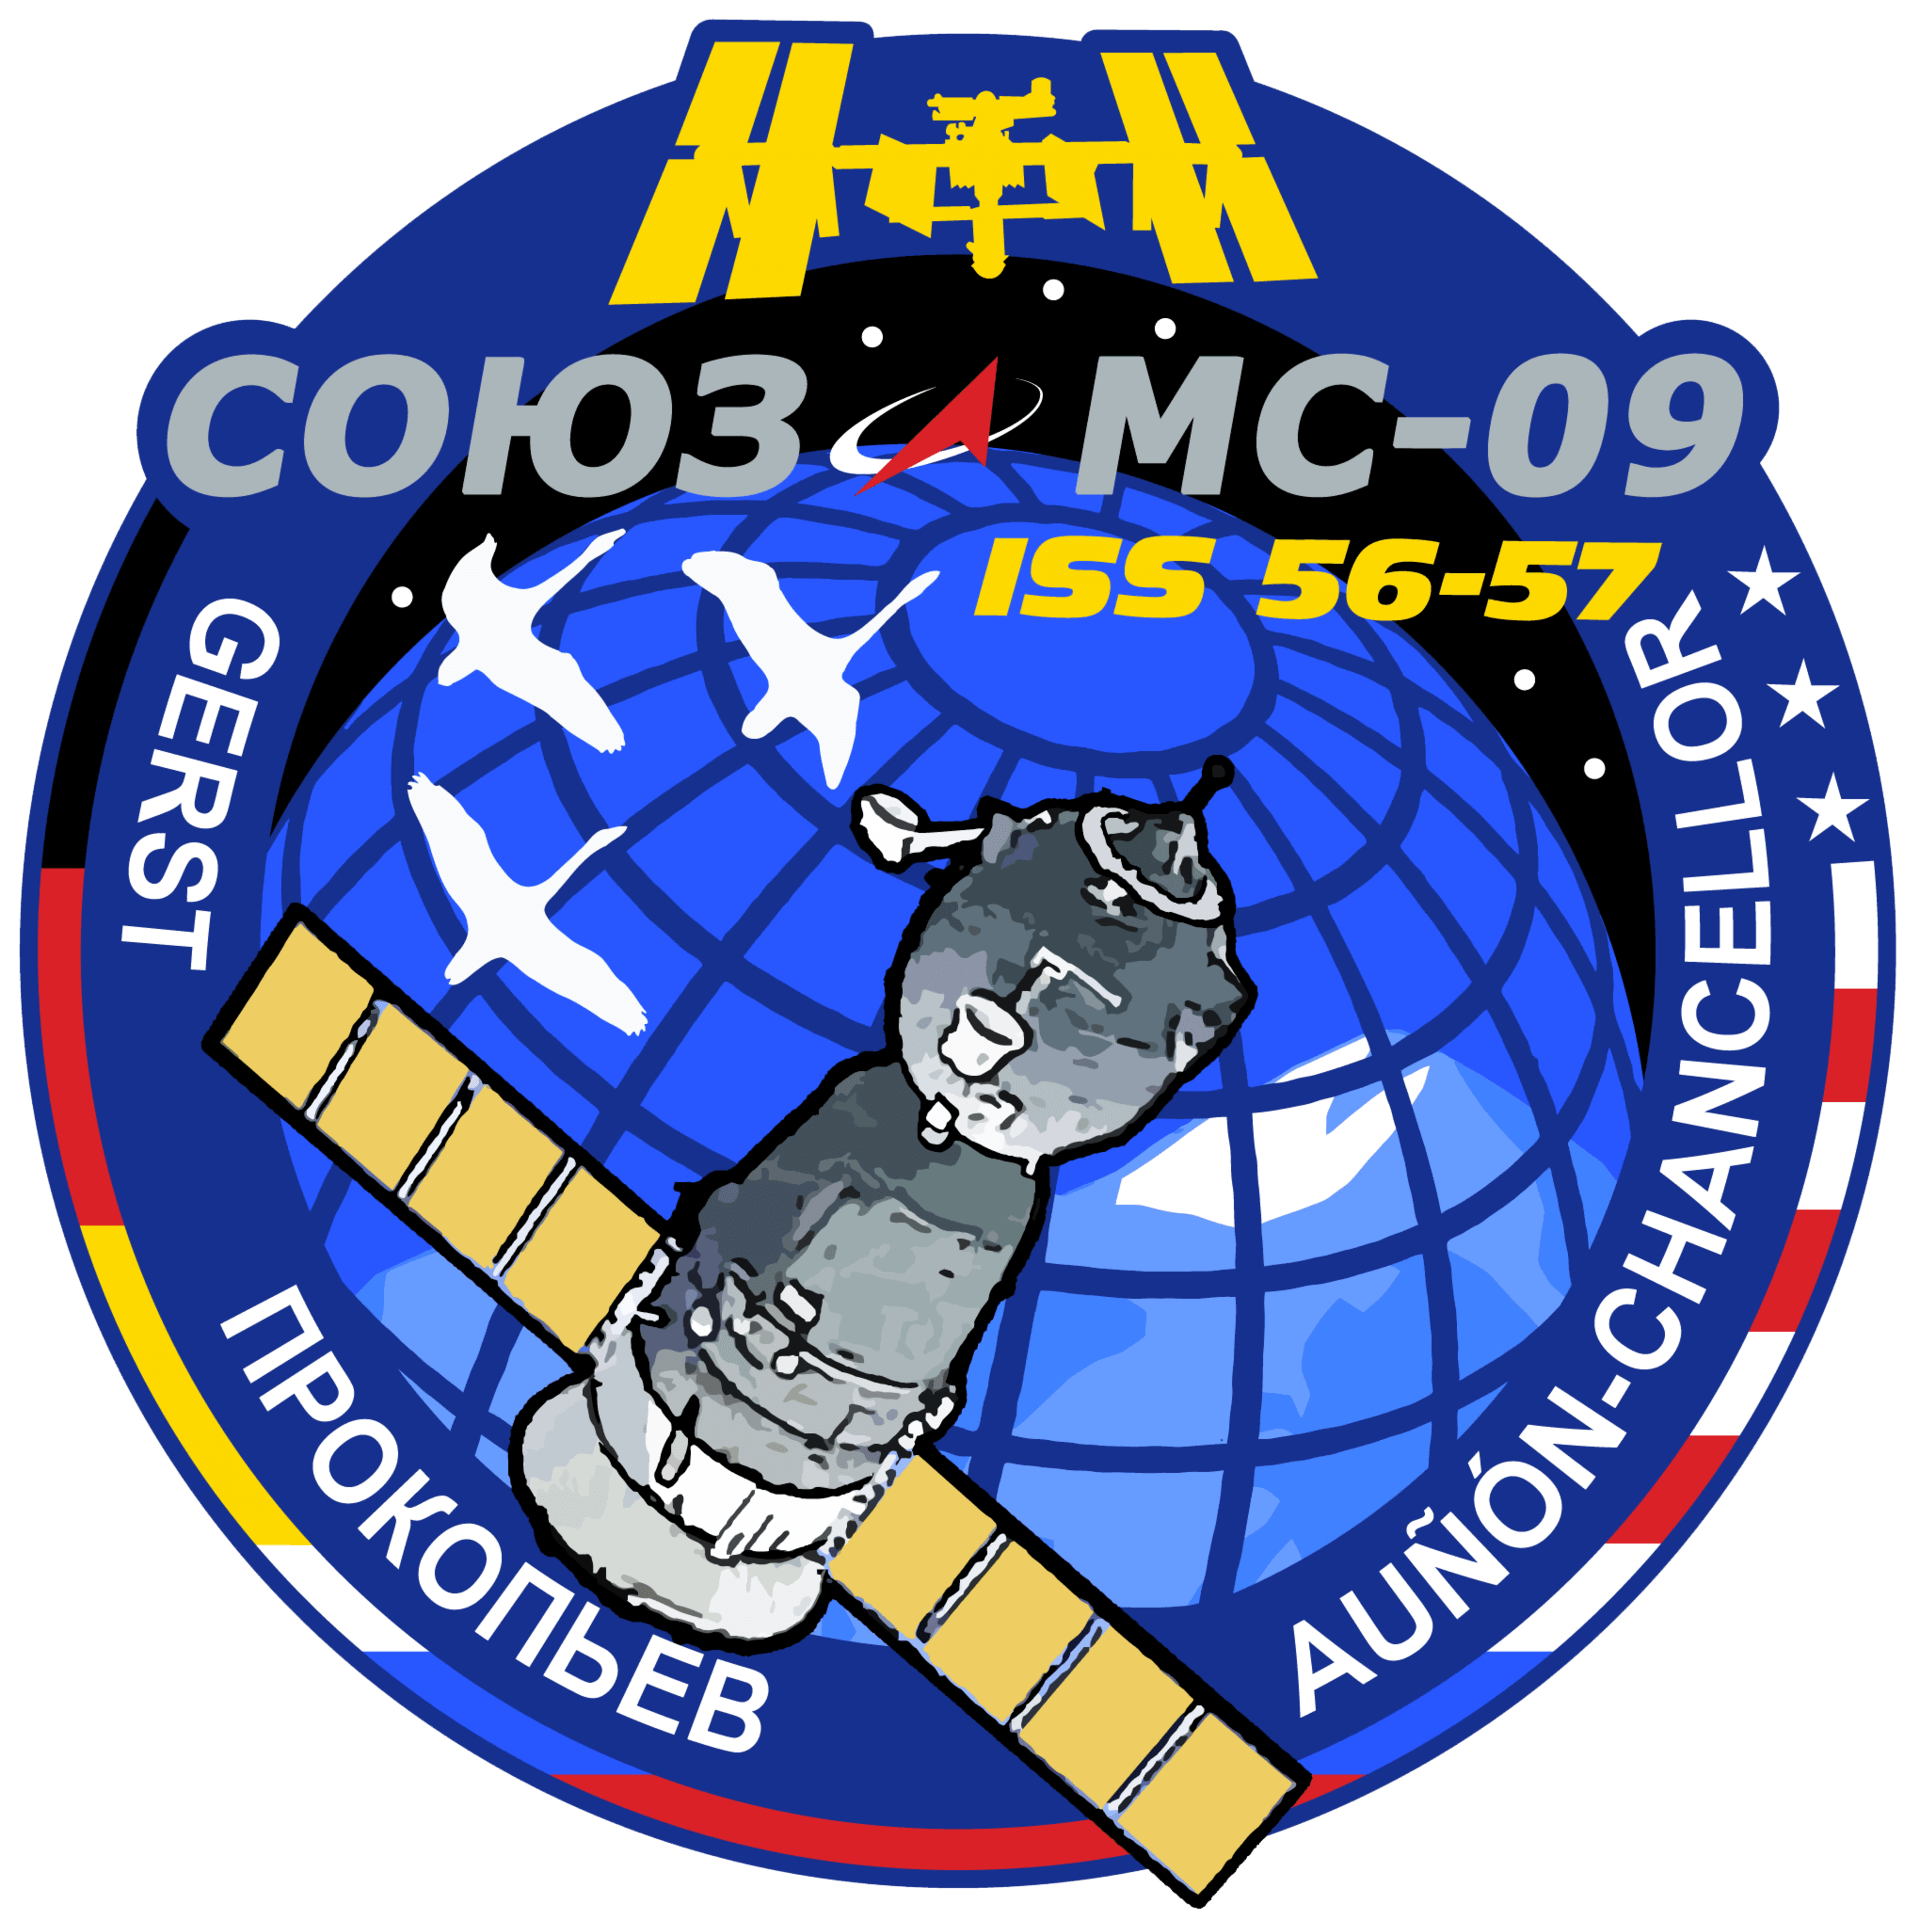 Mission patch for Soyuz MS-09